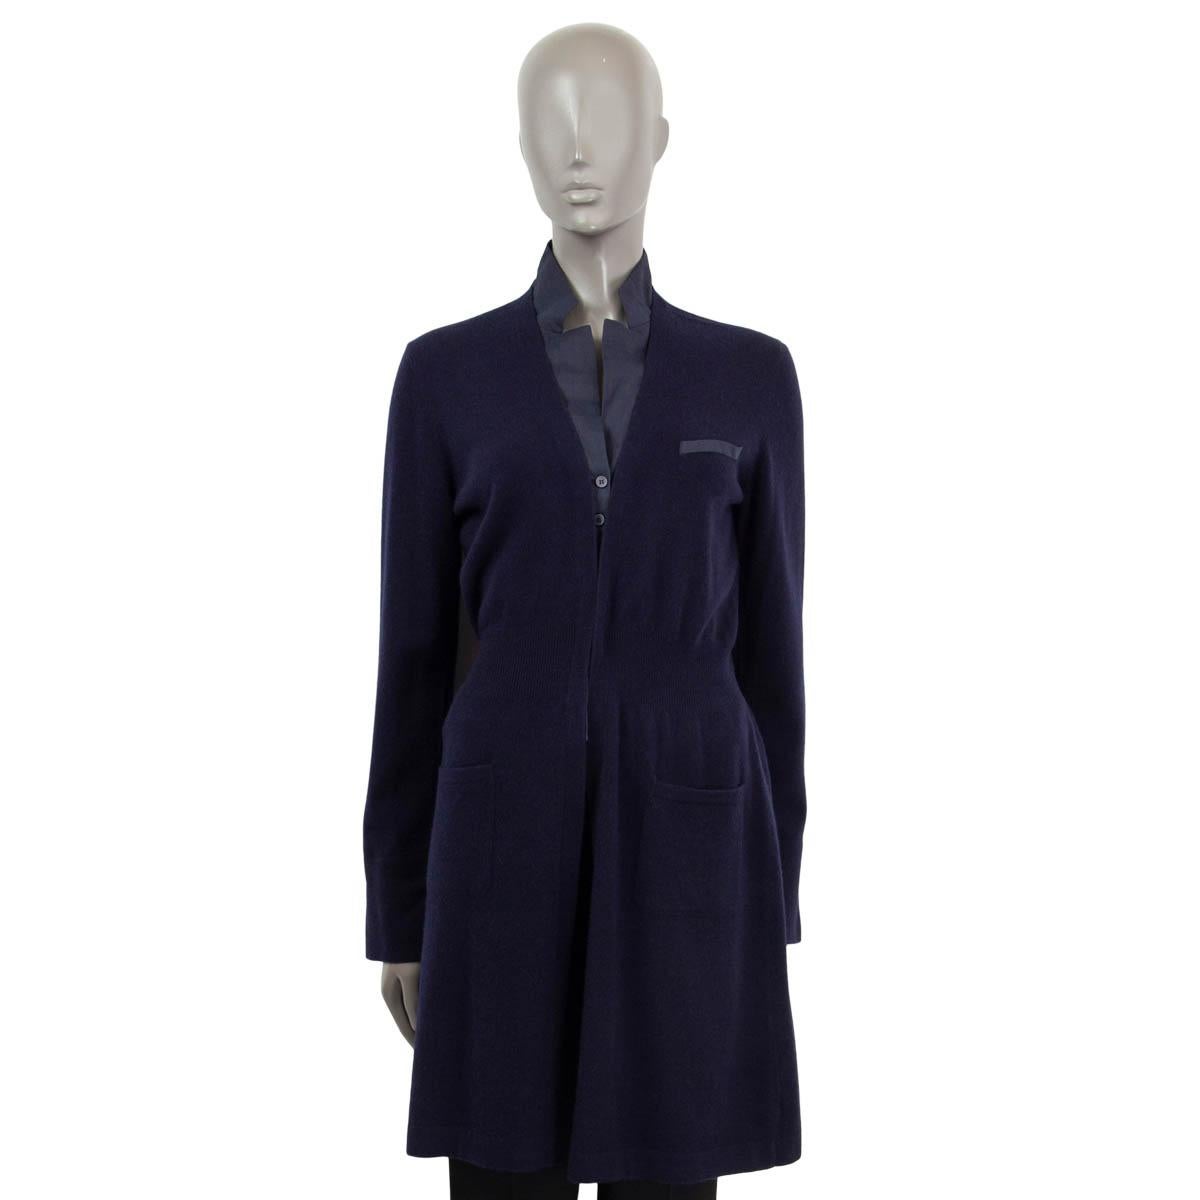 Black BRUNELLO CUCINELLI navy blue cashmere LAYERED LONG Cardigan Sweater L For Sale